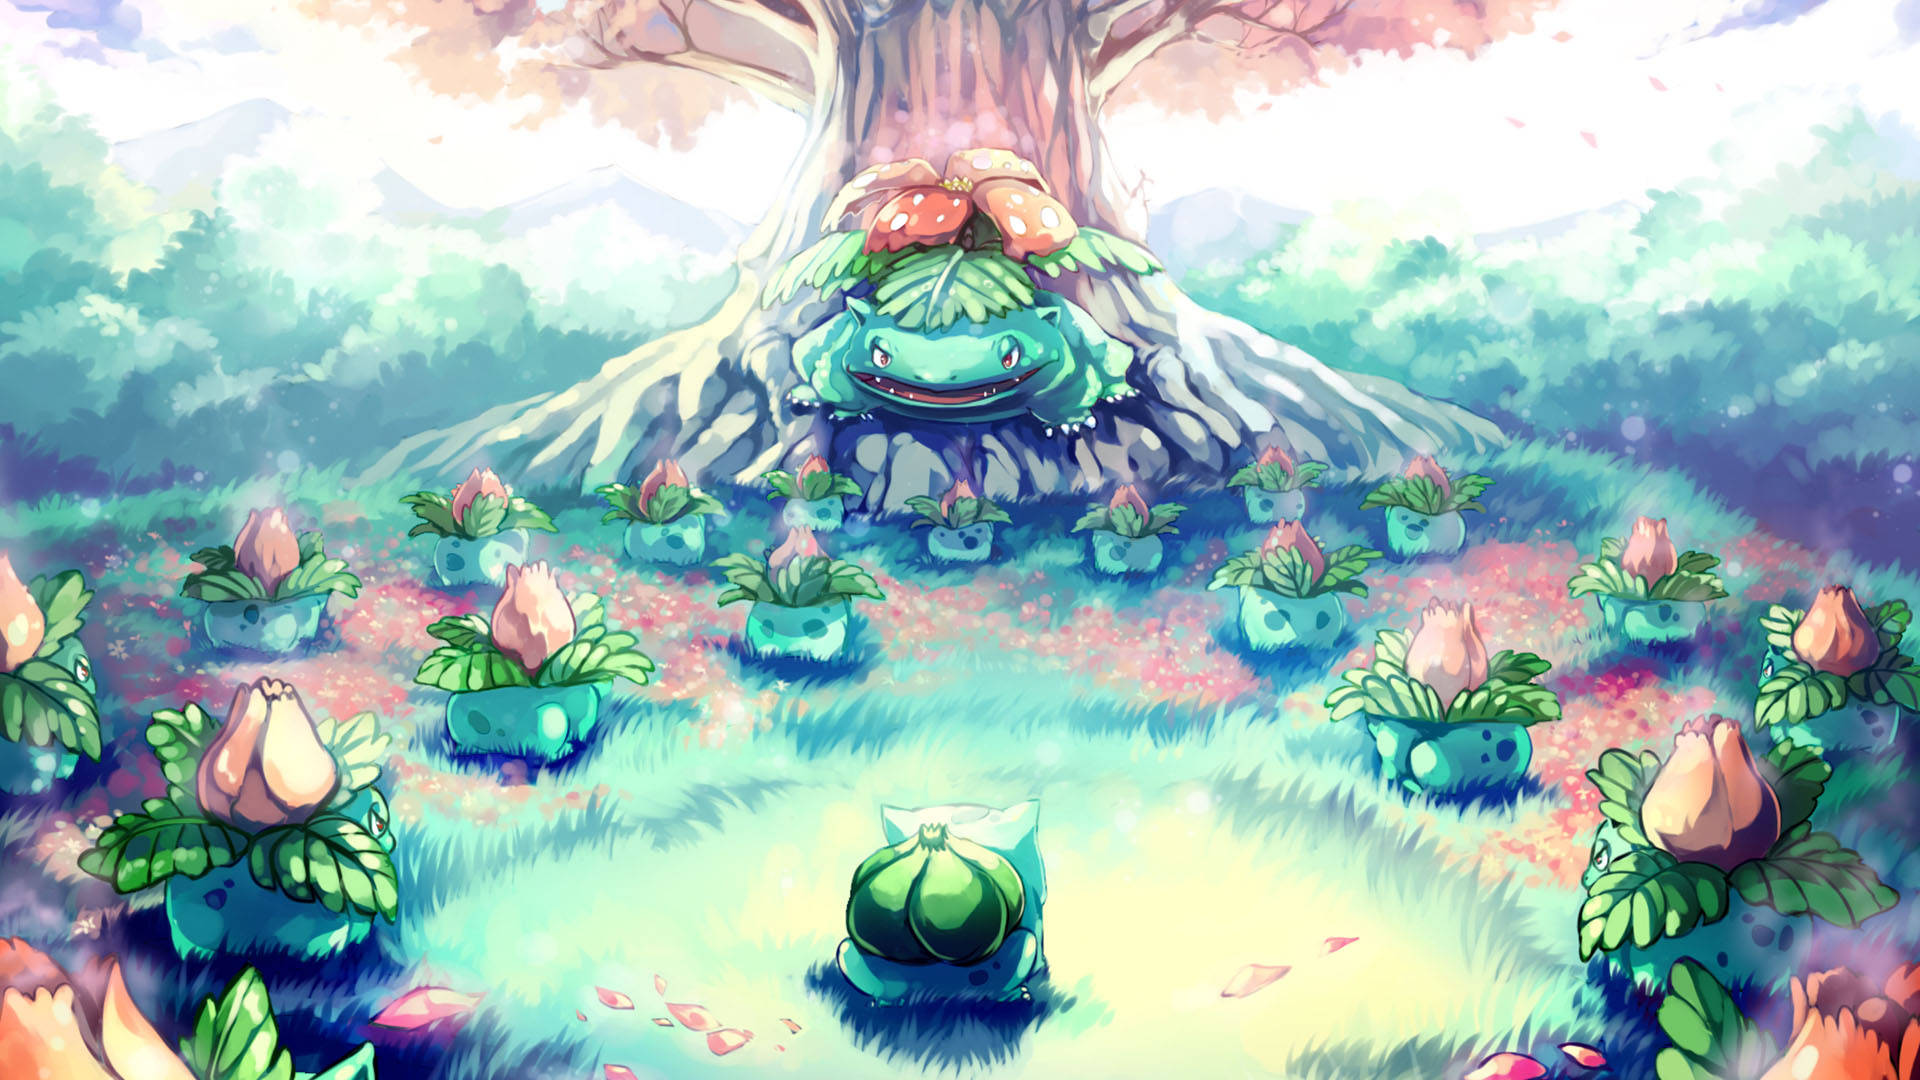 Bulbasaur Swinging On A Tree Branch In A Forest Wallpaper